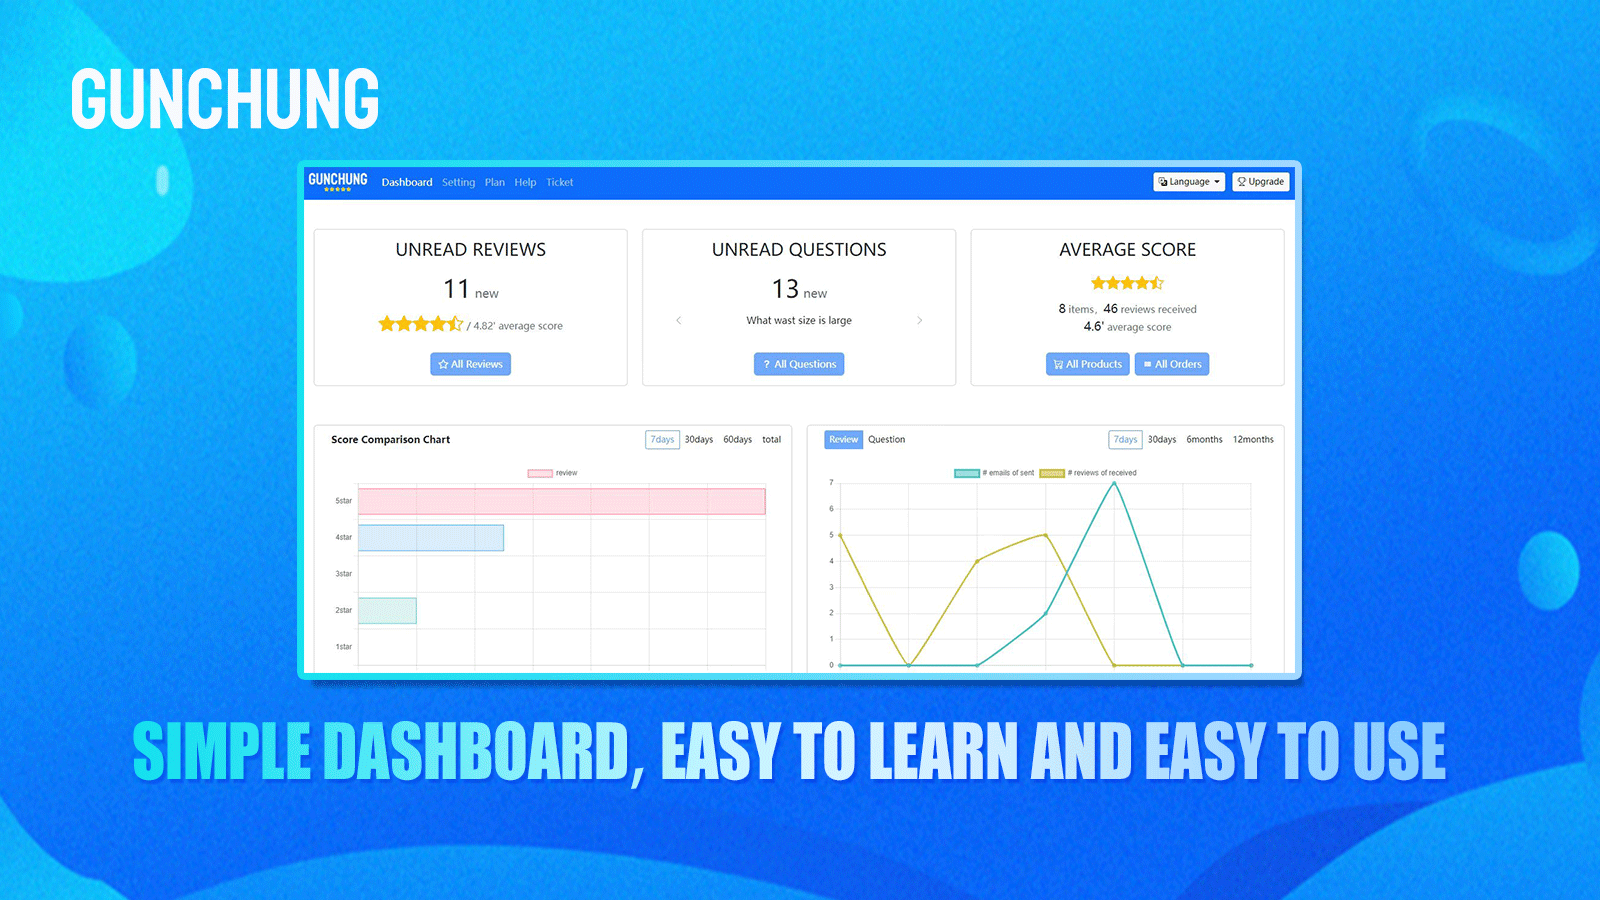 Simple dashboard, easy to learn and use